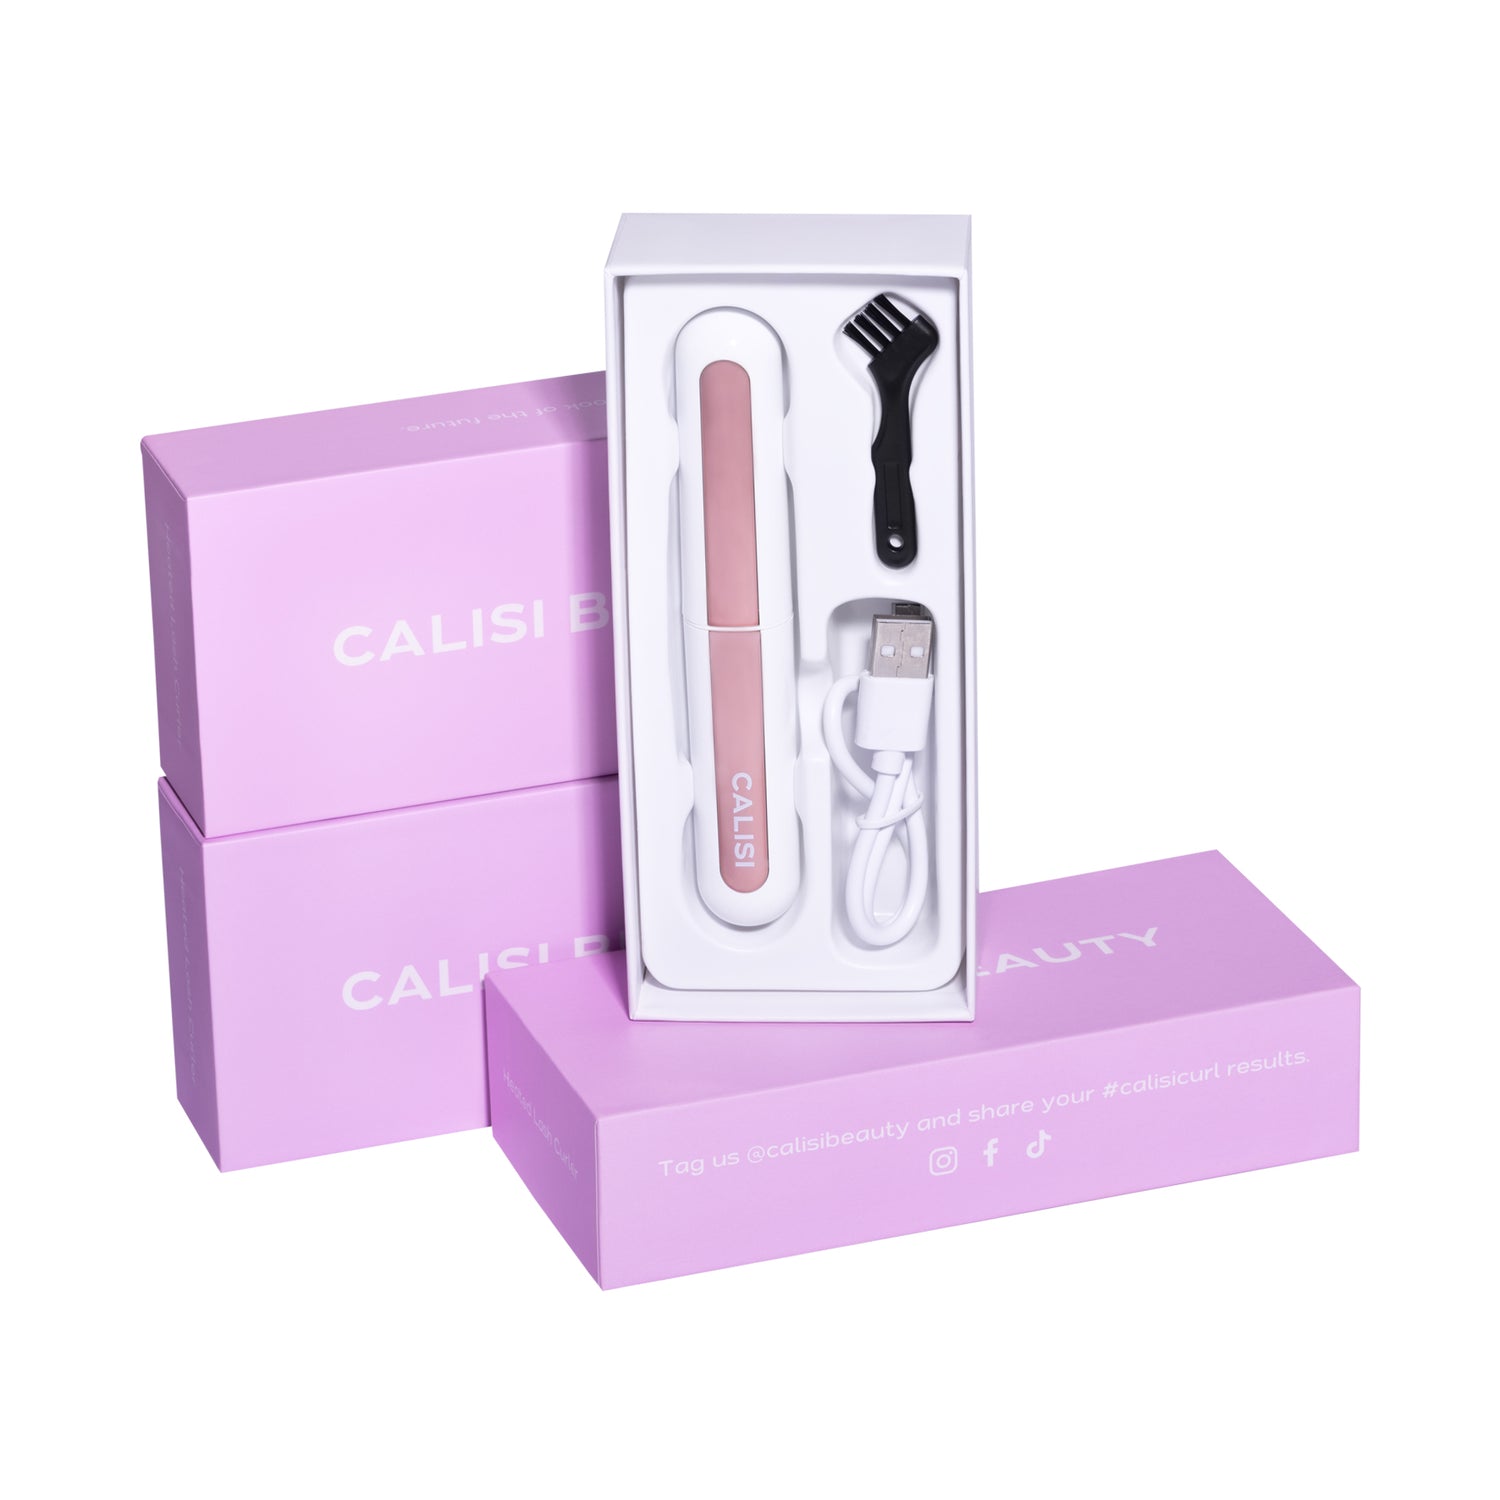 CALISI CURLER™ Rechargeable Lash Curler